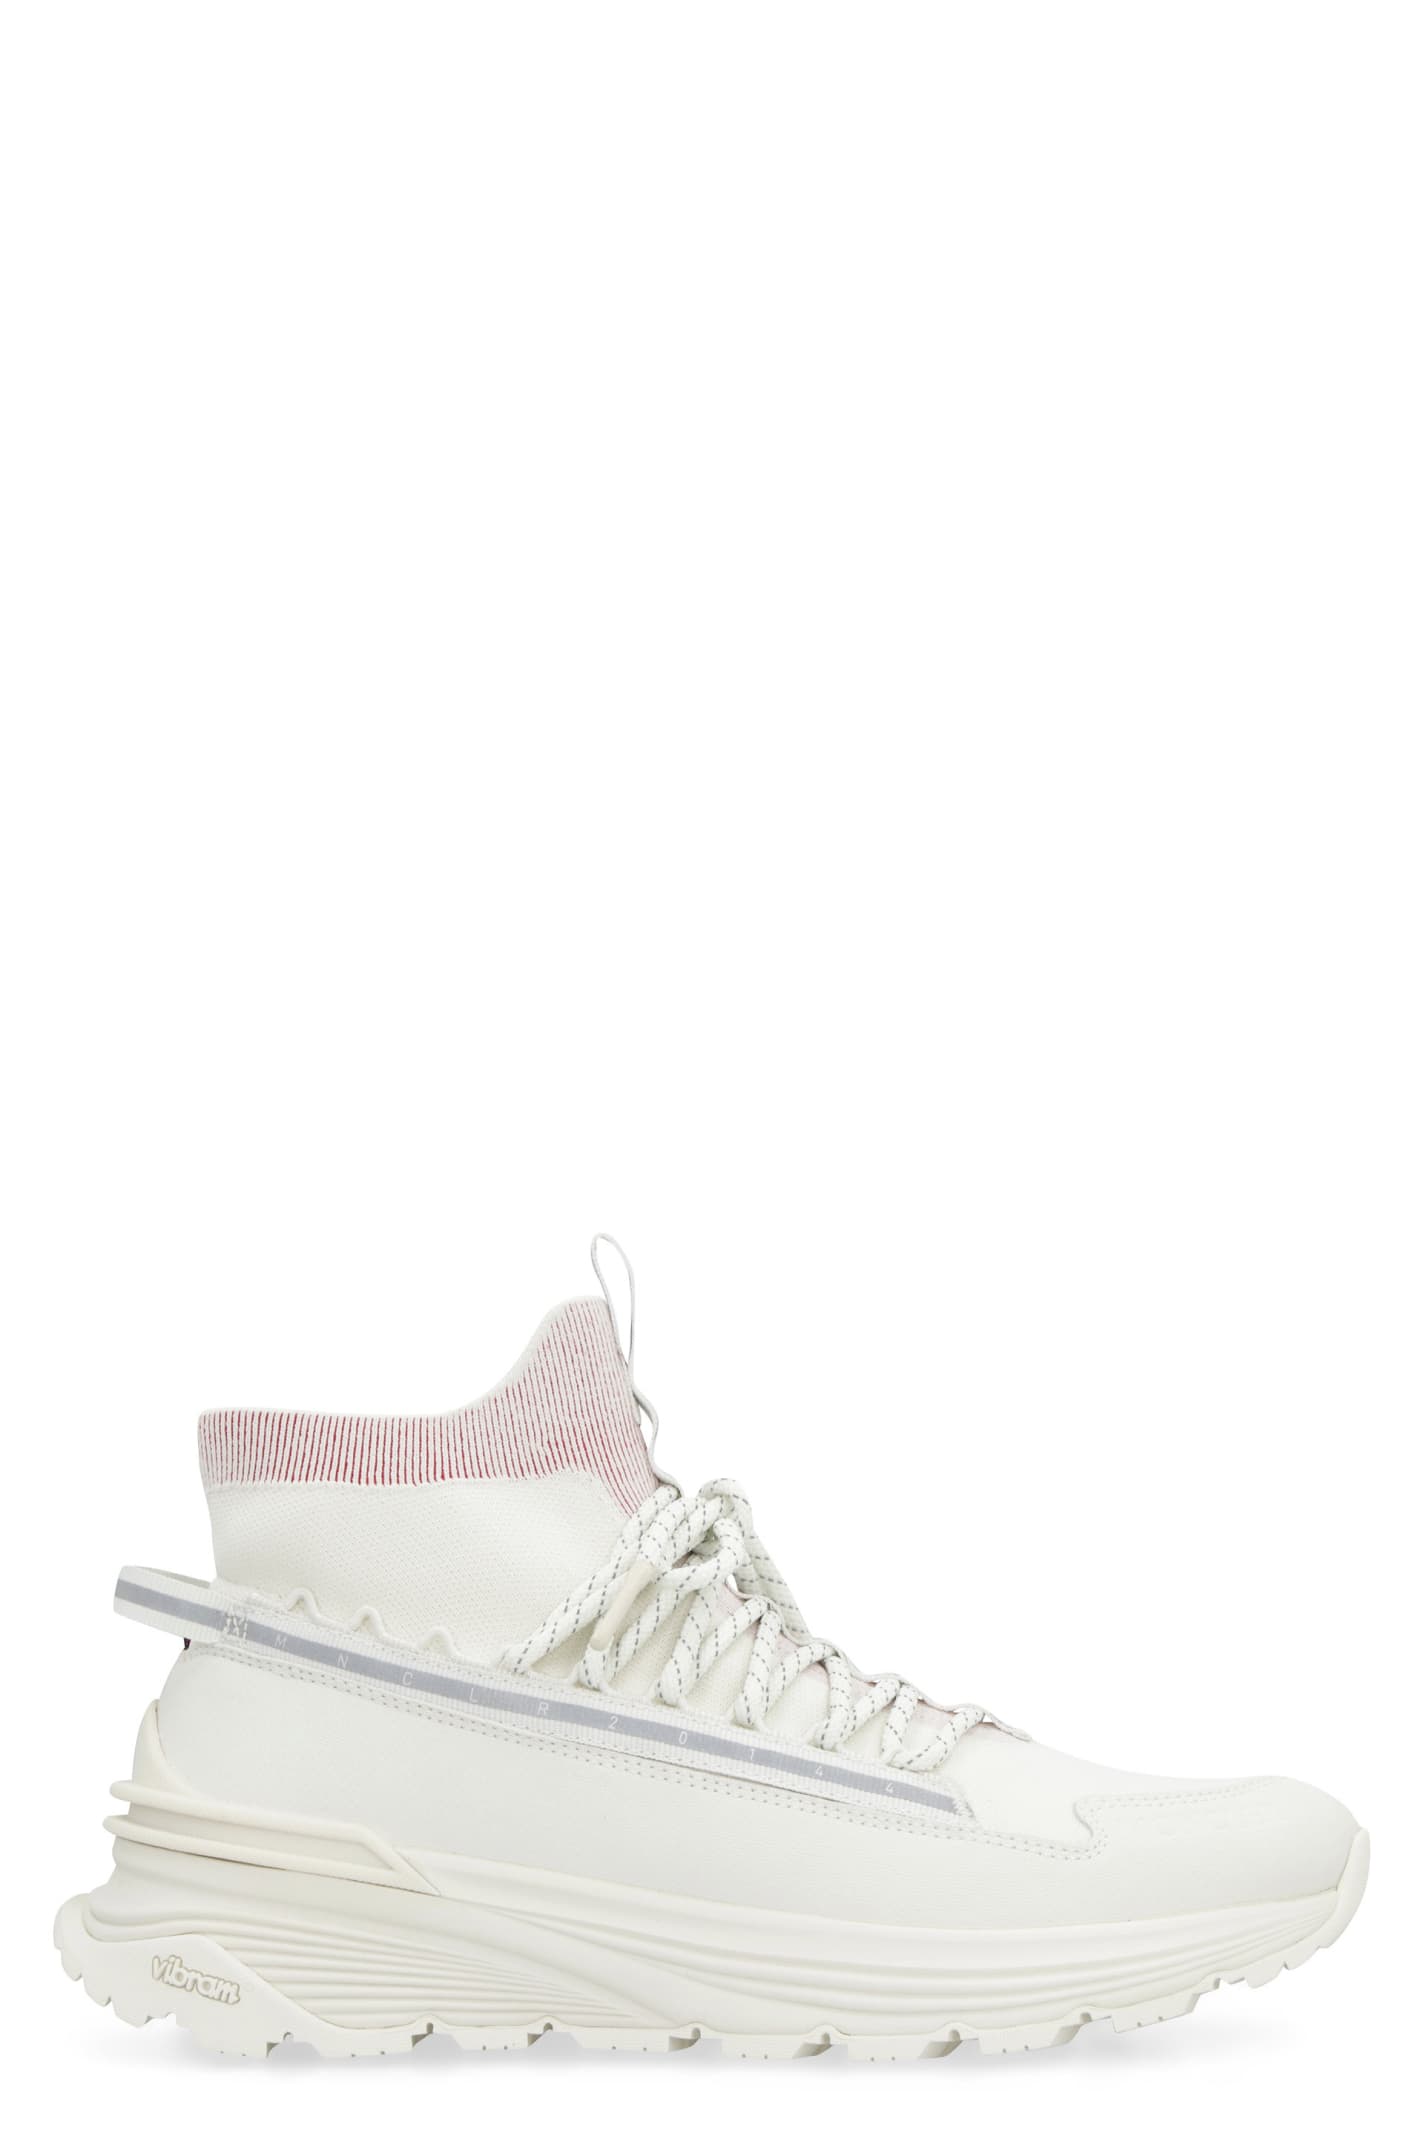 Moncler Monte Runner High-top Sneakers In White